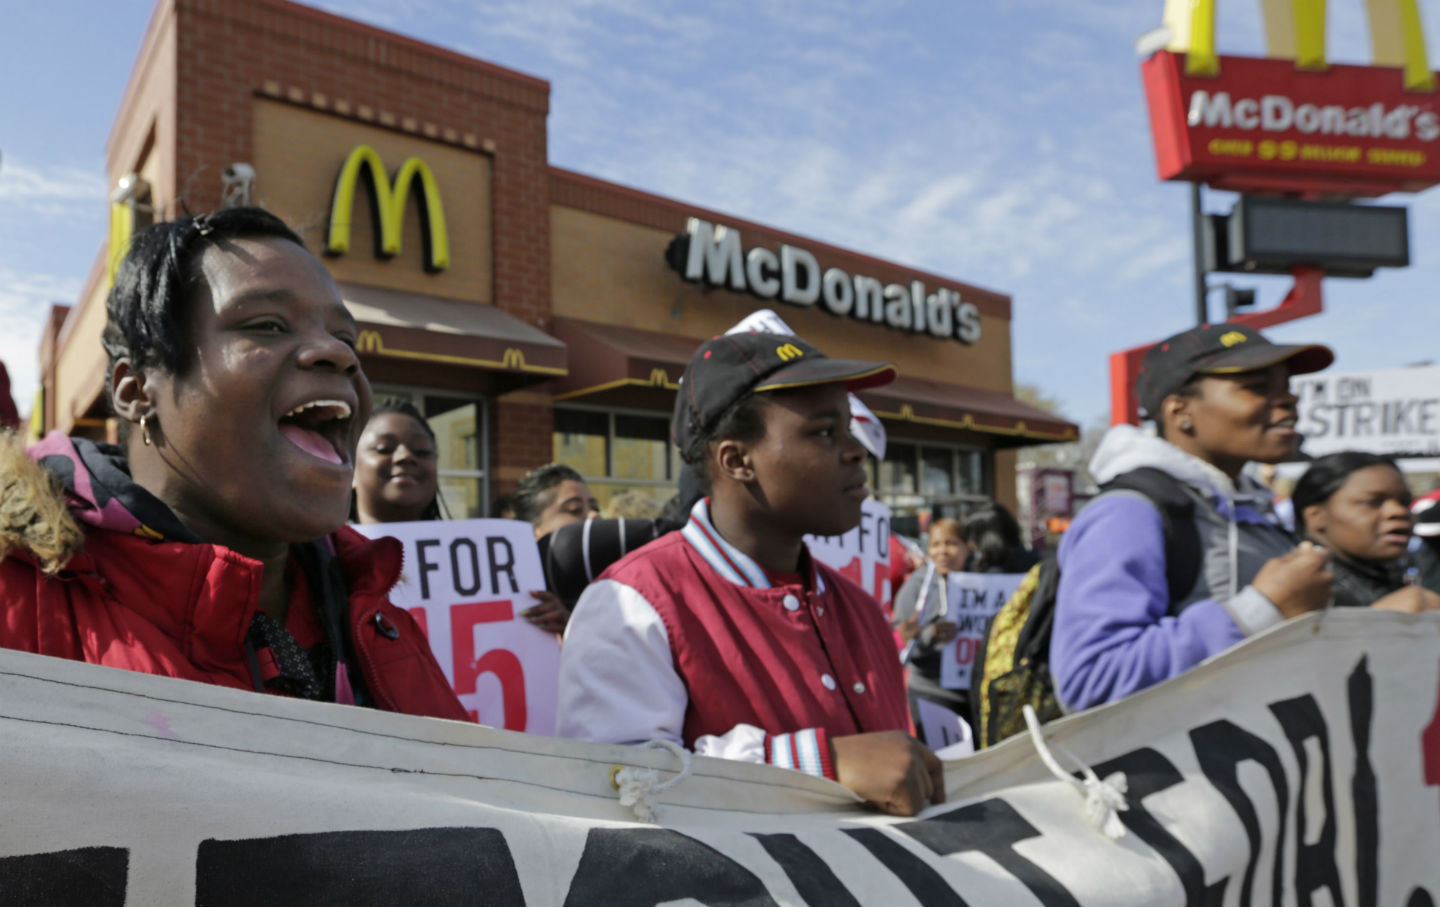 McDonald's protesters fight for 15